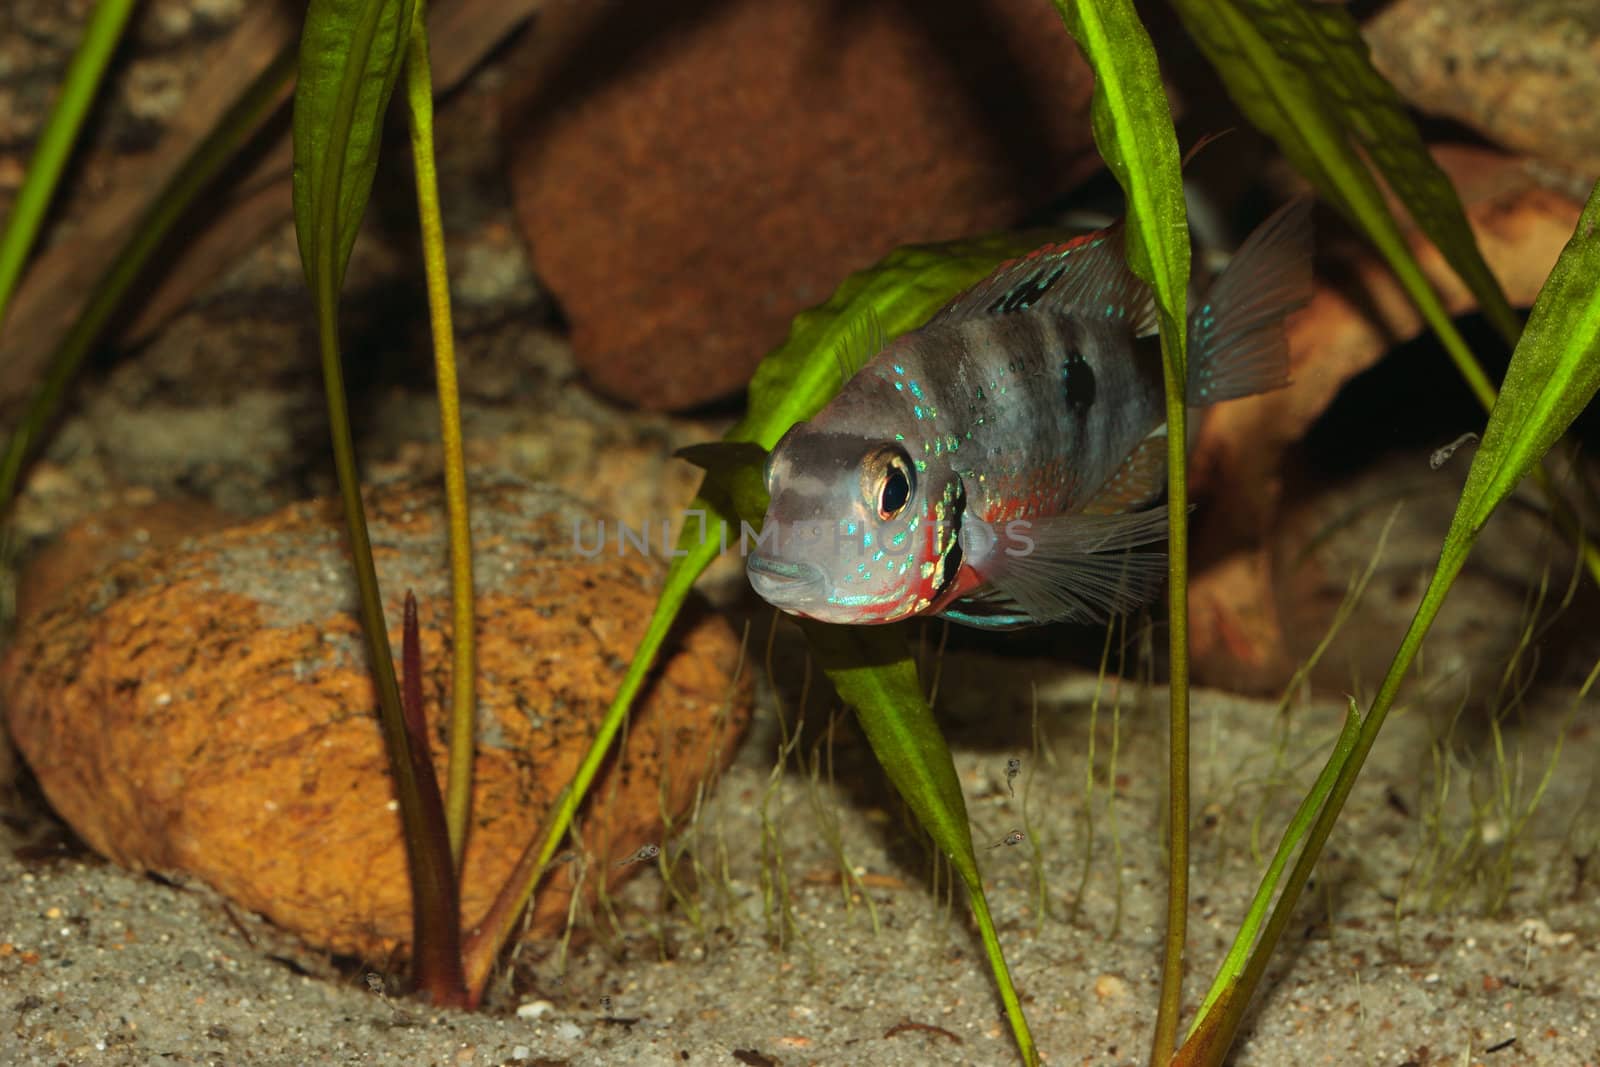 Mexican Fire Mouth (Thorichthys ellioti) by tdietrich